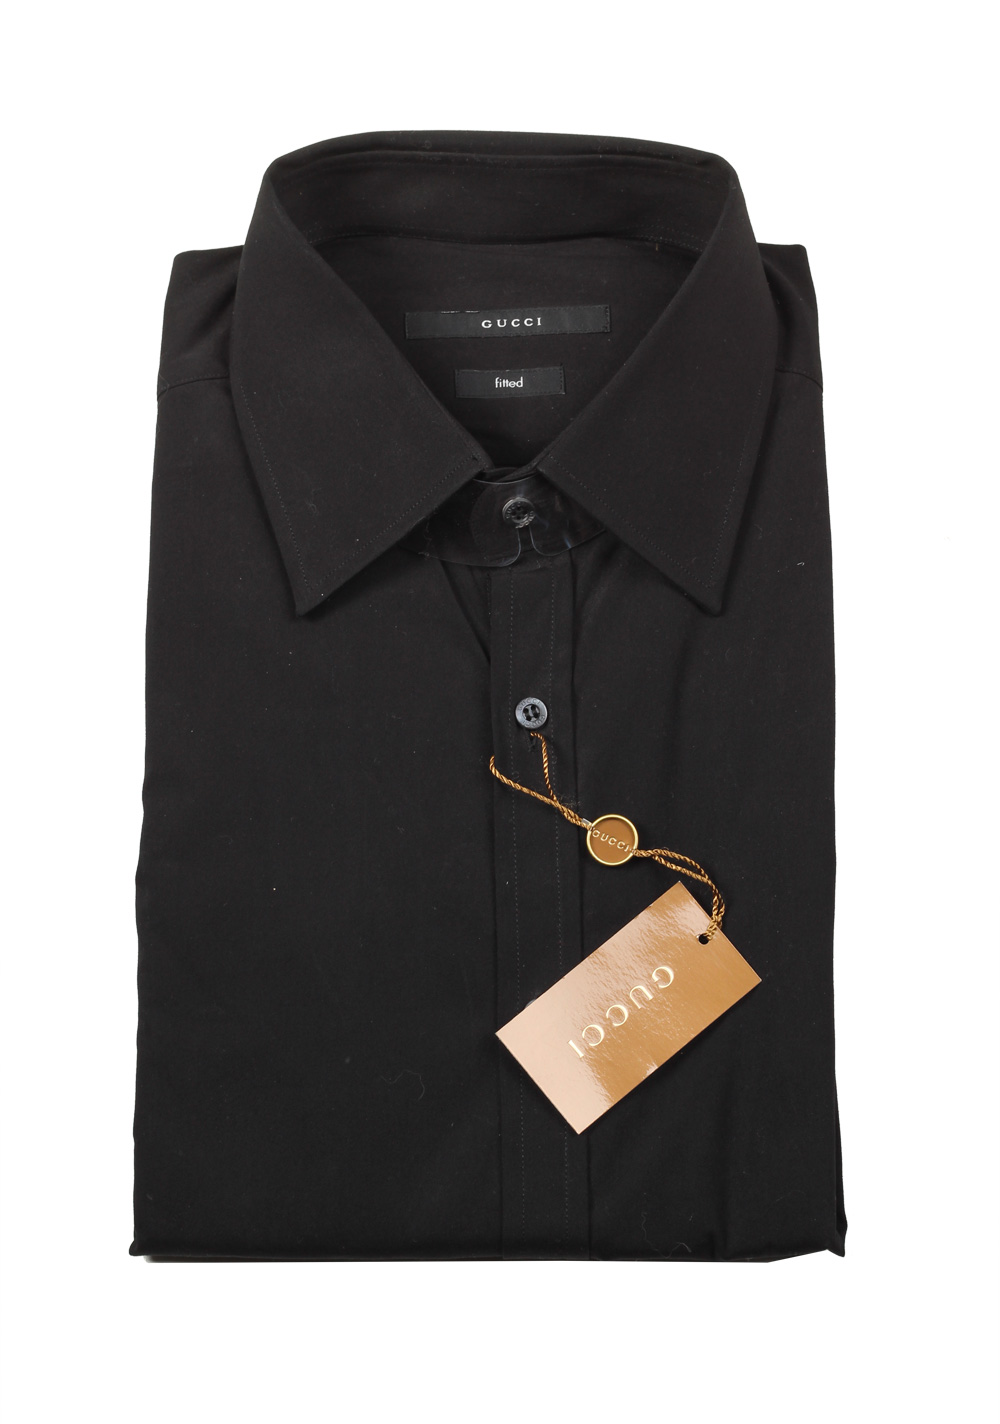 Gucci Solid Black Dress Shirt Size 42 / 16,5 U.S. Fitted